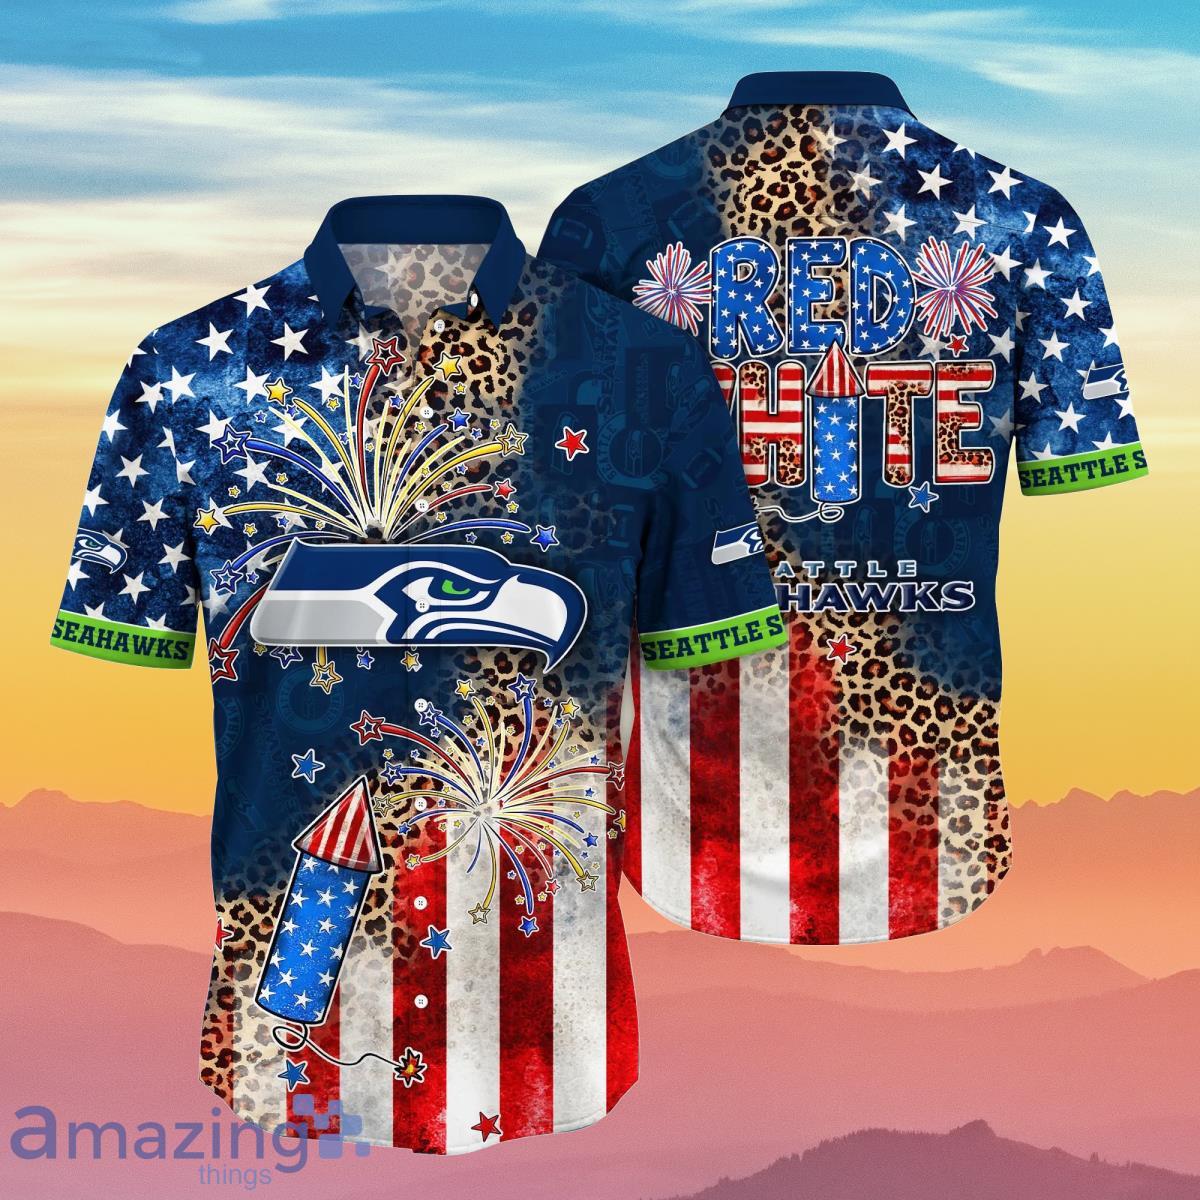 seattle seahawks products